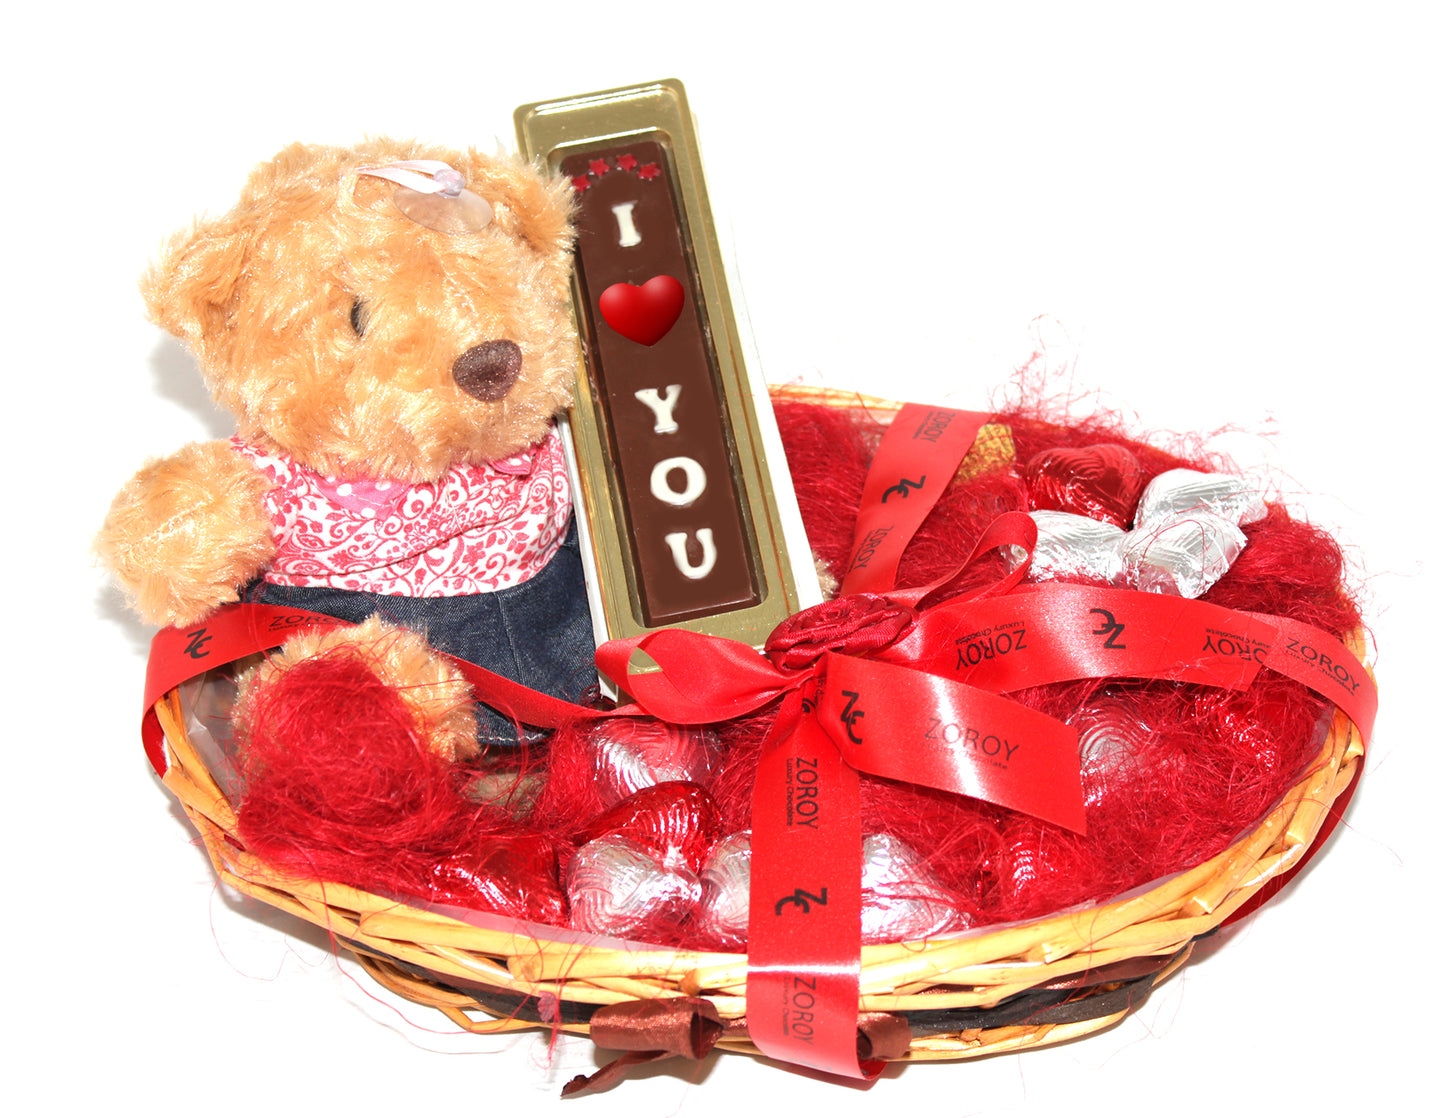 ZOROY The Romance HER Gift Hamper with 7 inch teddy bear, I love you bar, and 15 milk chocolate hearts